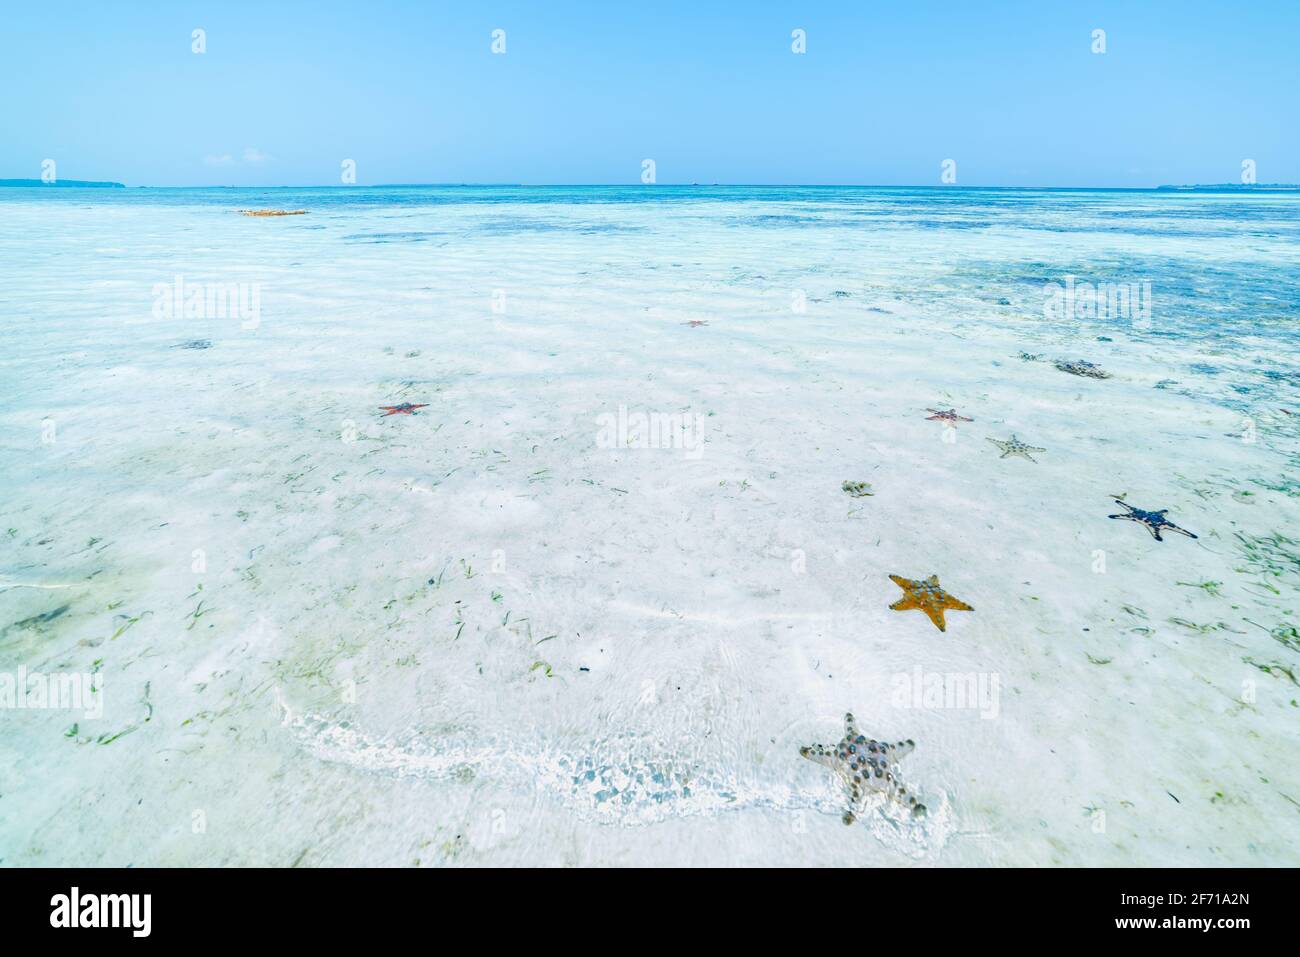 Seastars in turquoise transparent water, tropical caribbean sea, clean uncontaminated environment, Indonesia Stock Photo